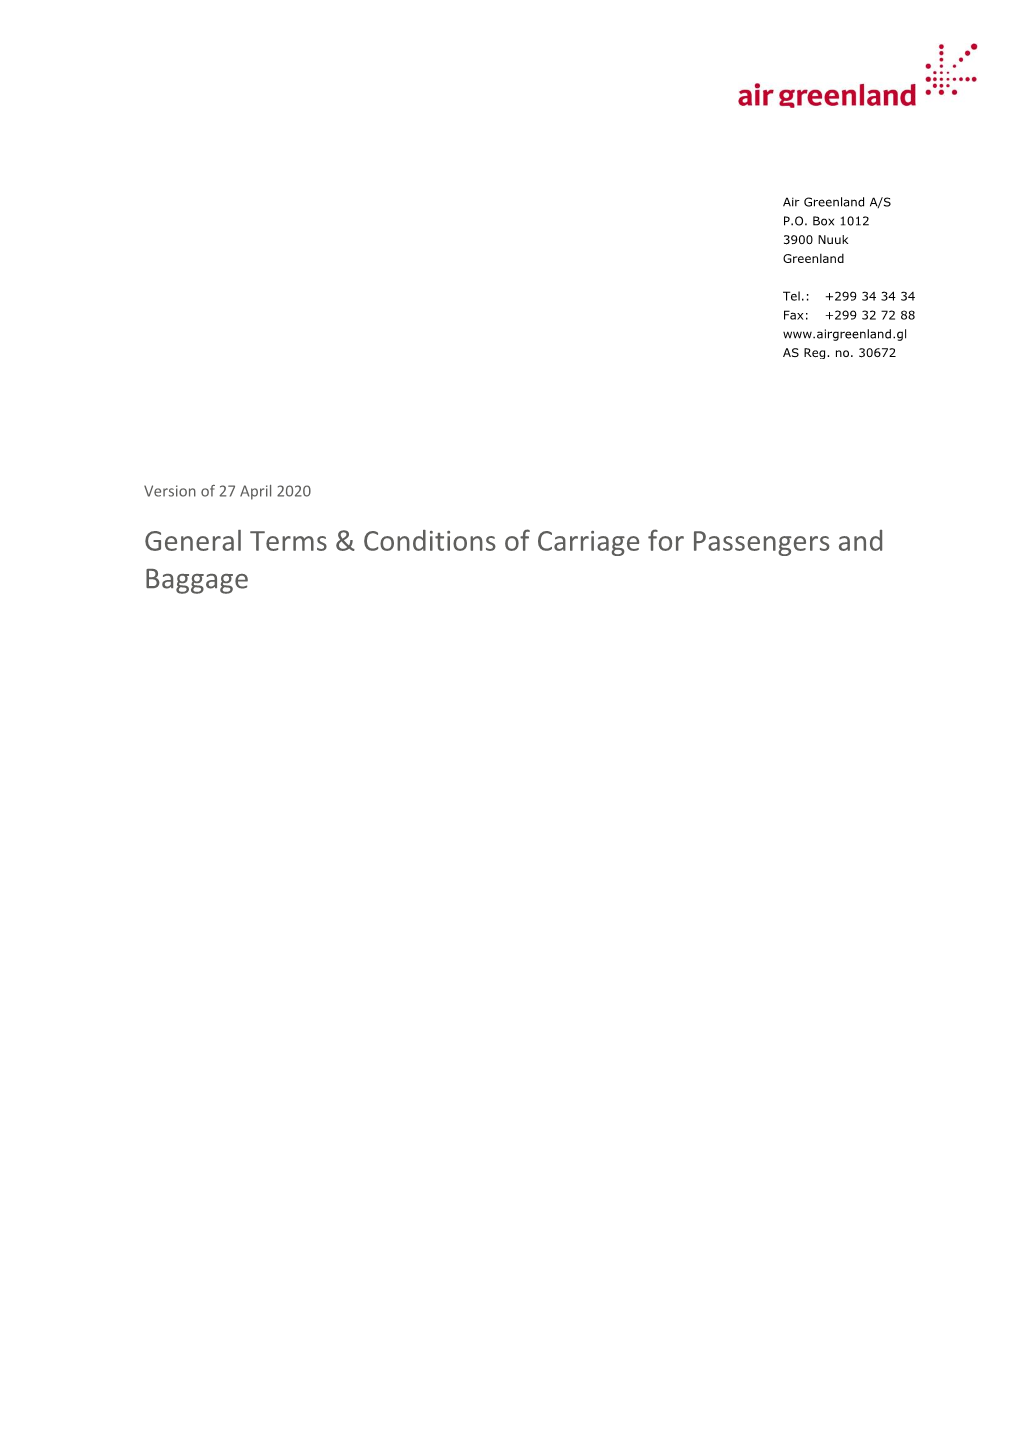 General Terms & Conditions of Carriage for Passengers and Baggage